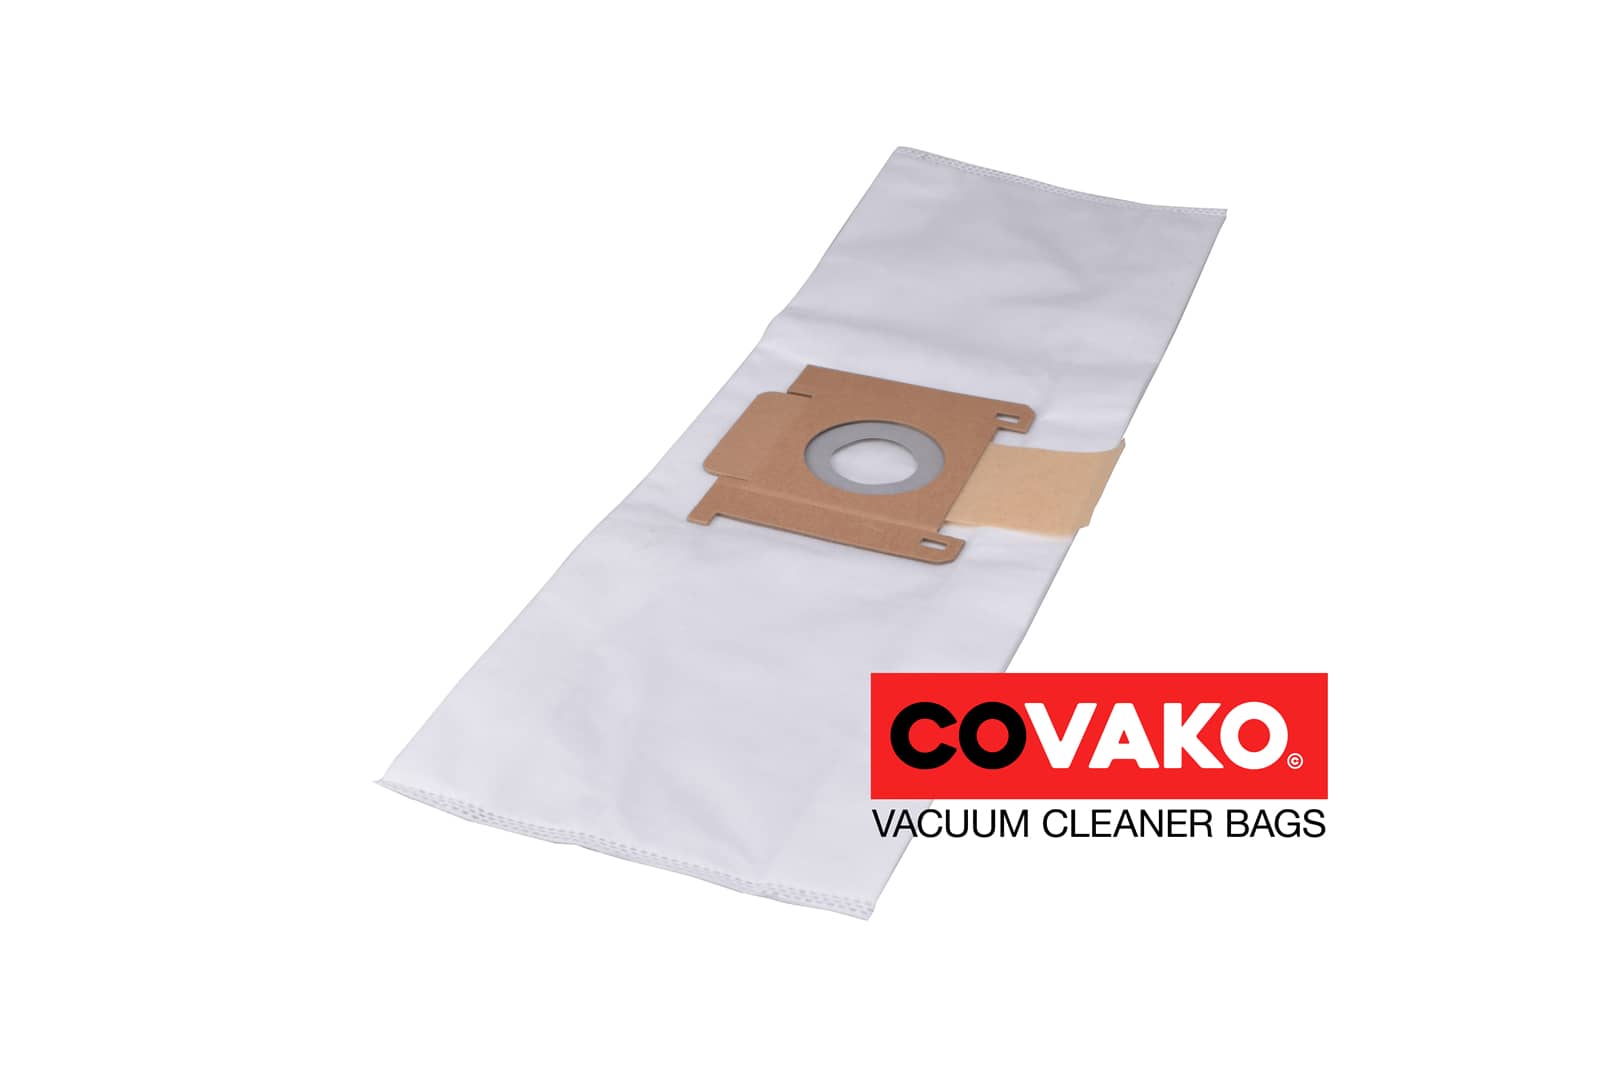 Oehme Otto Hi-Filtration 6.0 / Synthesis - Oehme Otto vacuum cleaner bags